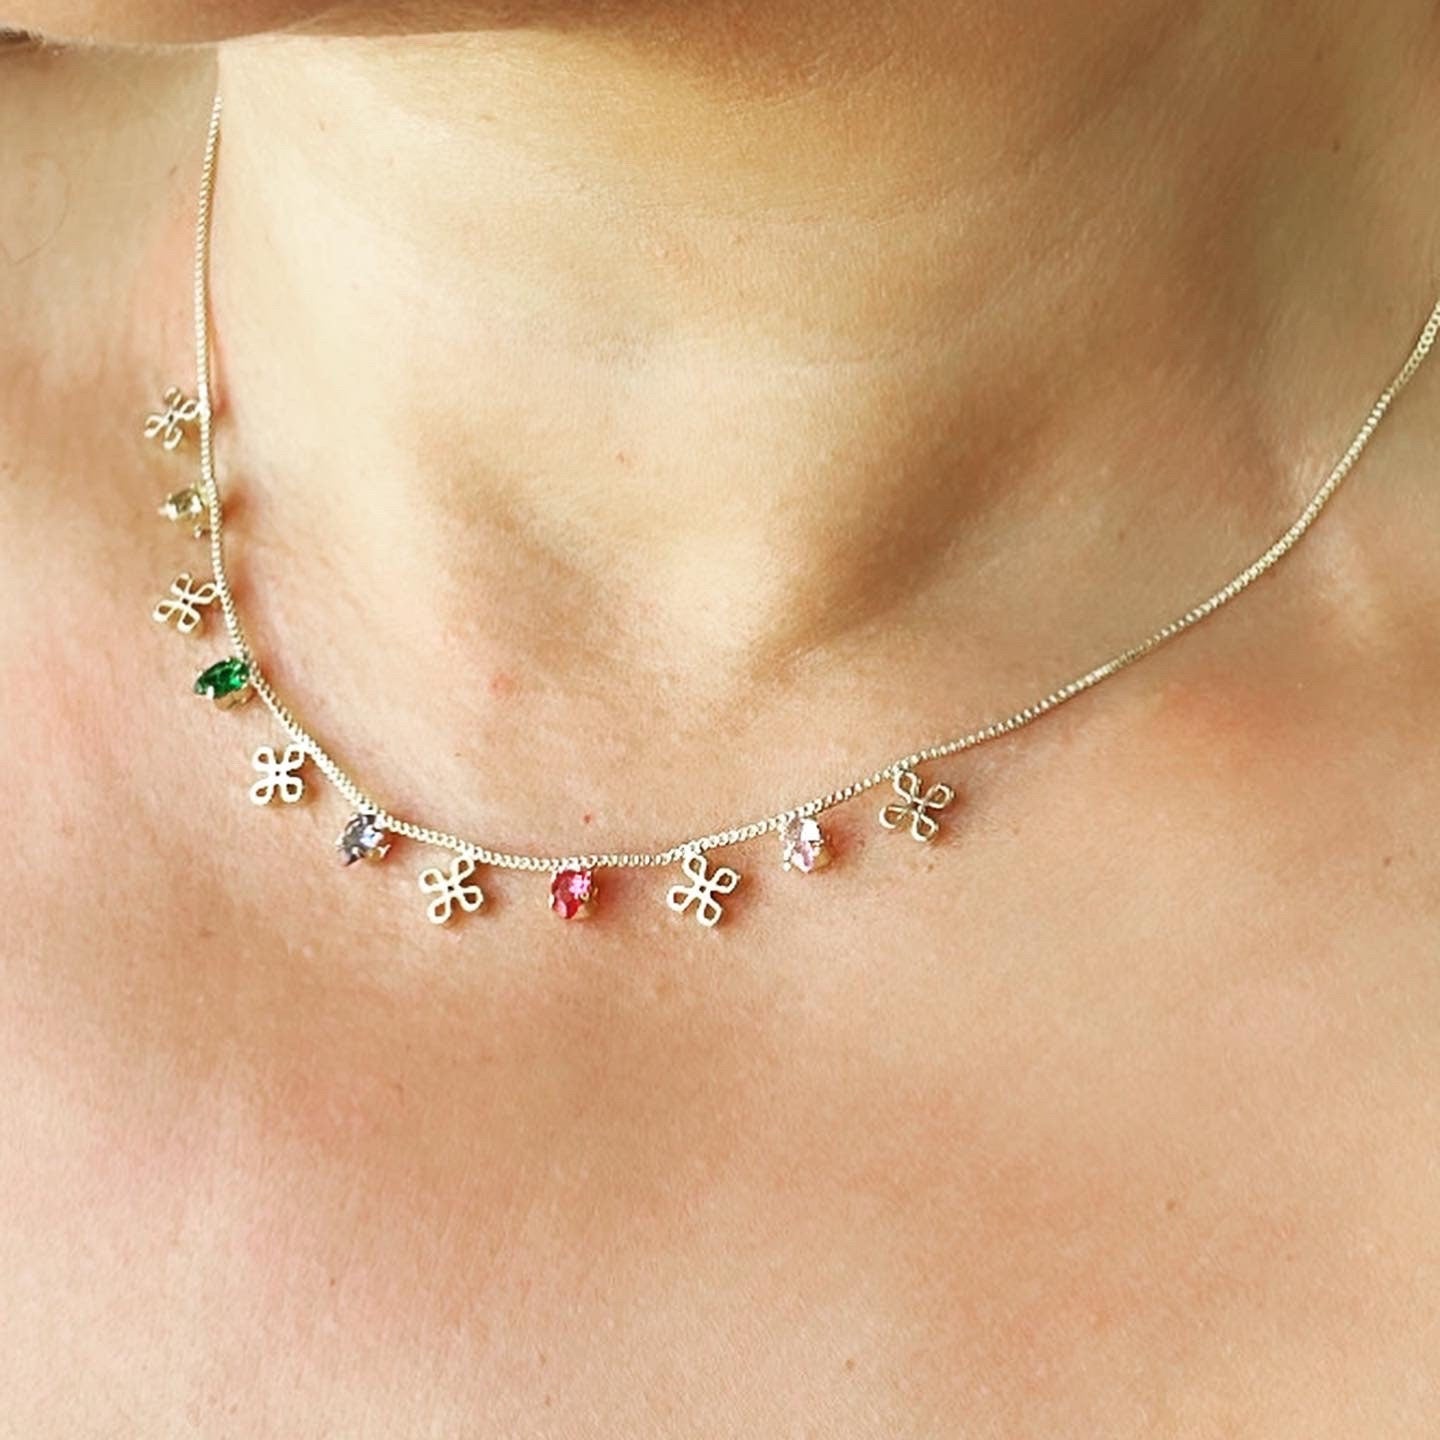 18k Gold Filled Dainty Box Chain Choker With Colorful CZ and Flower Charms